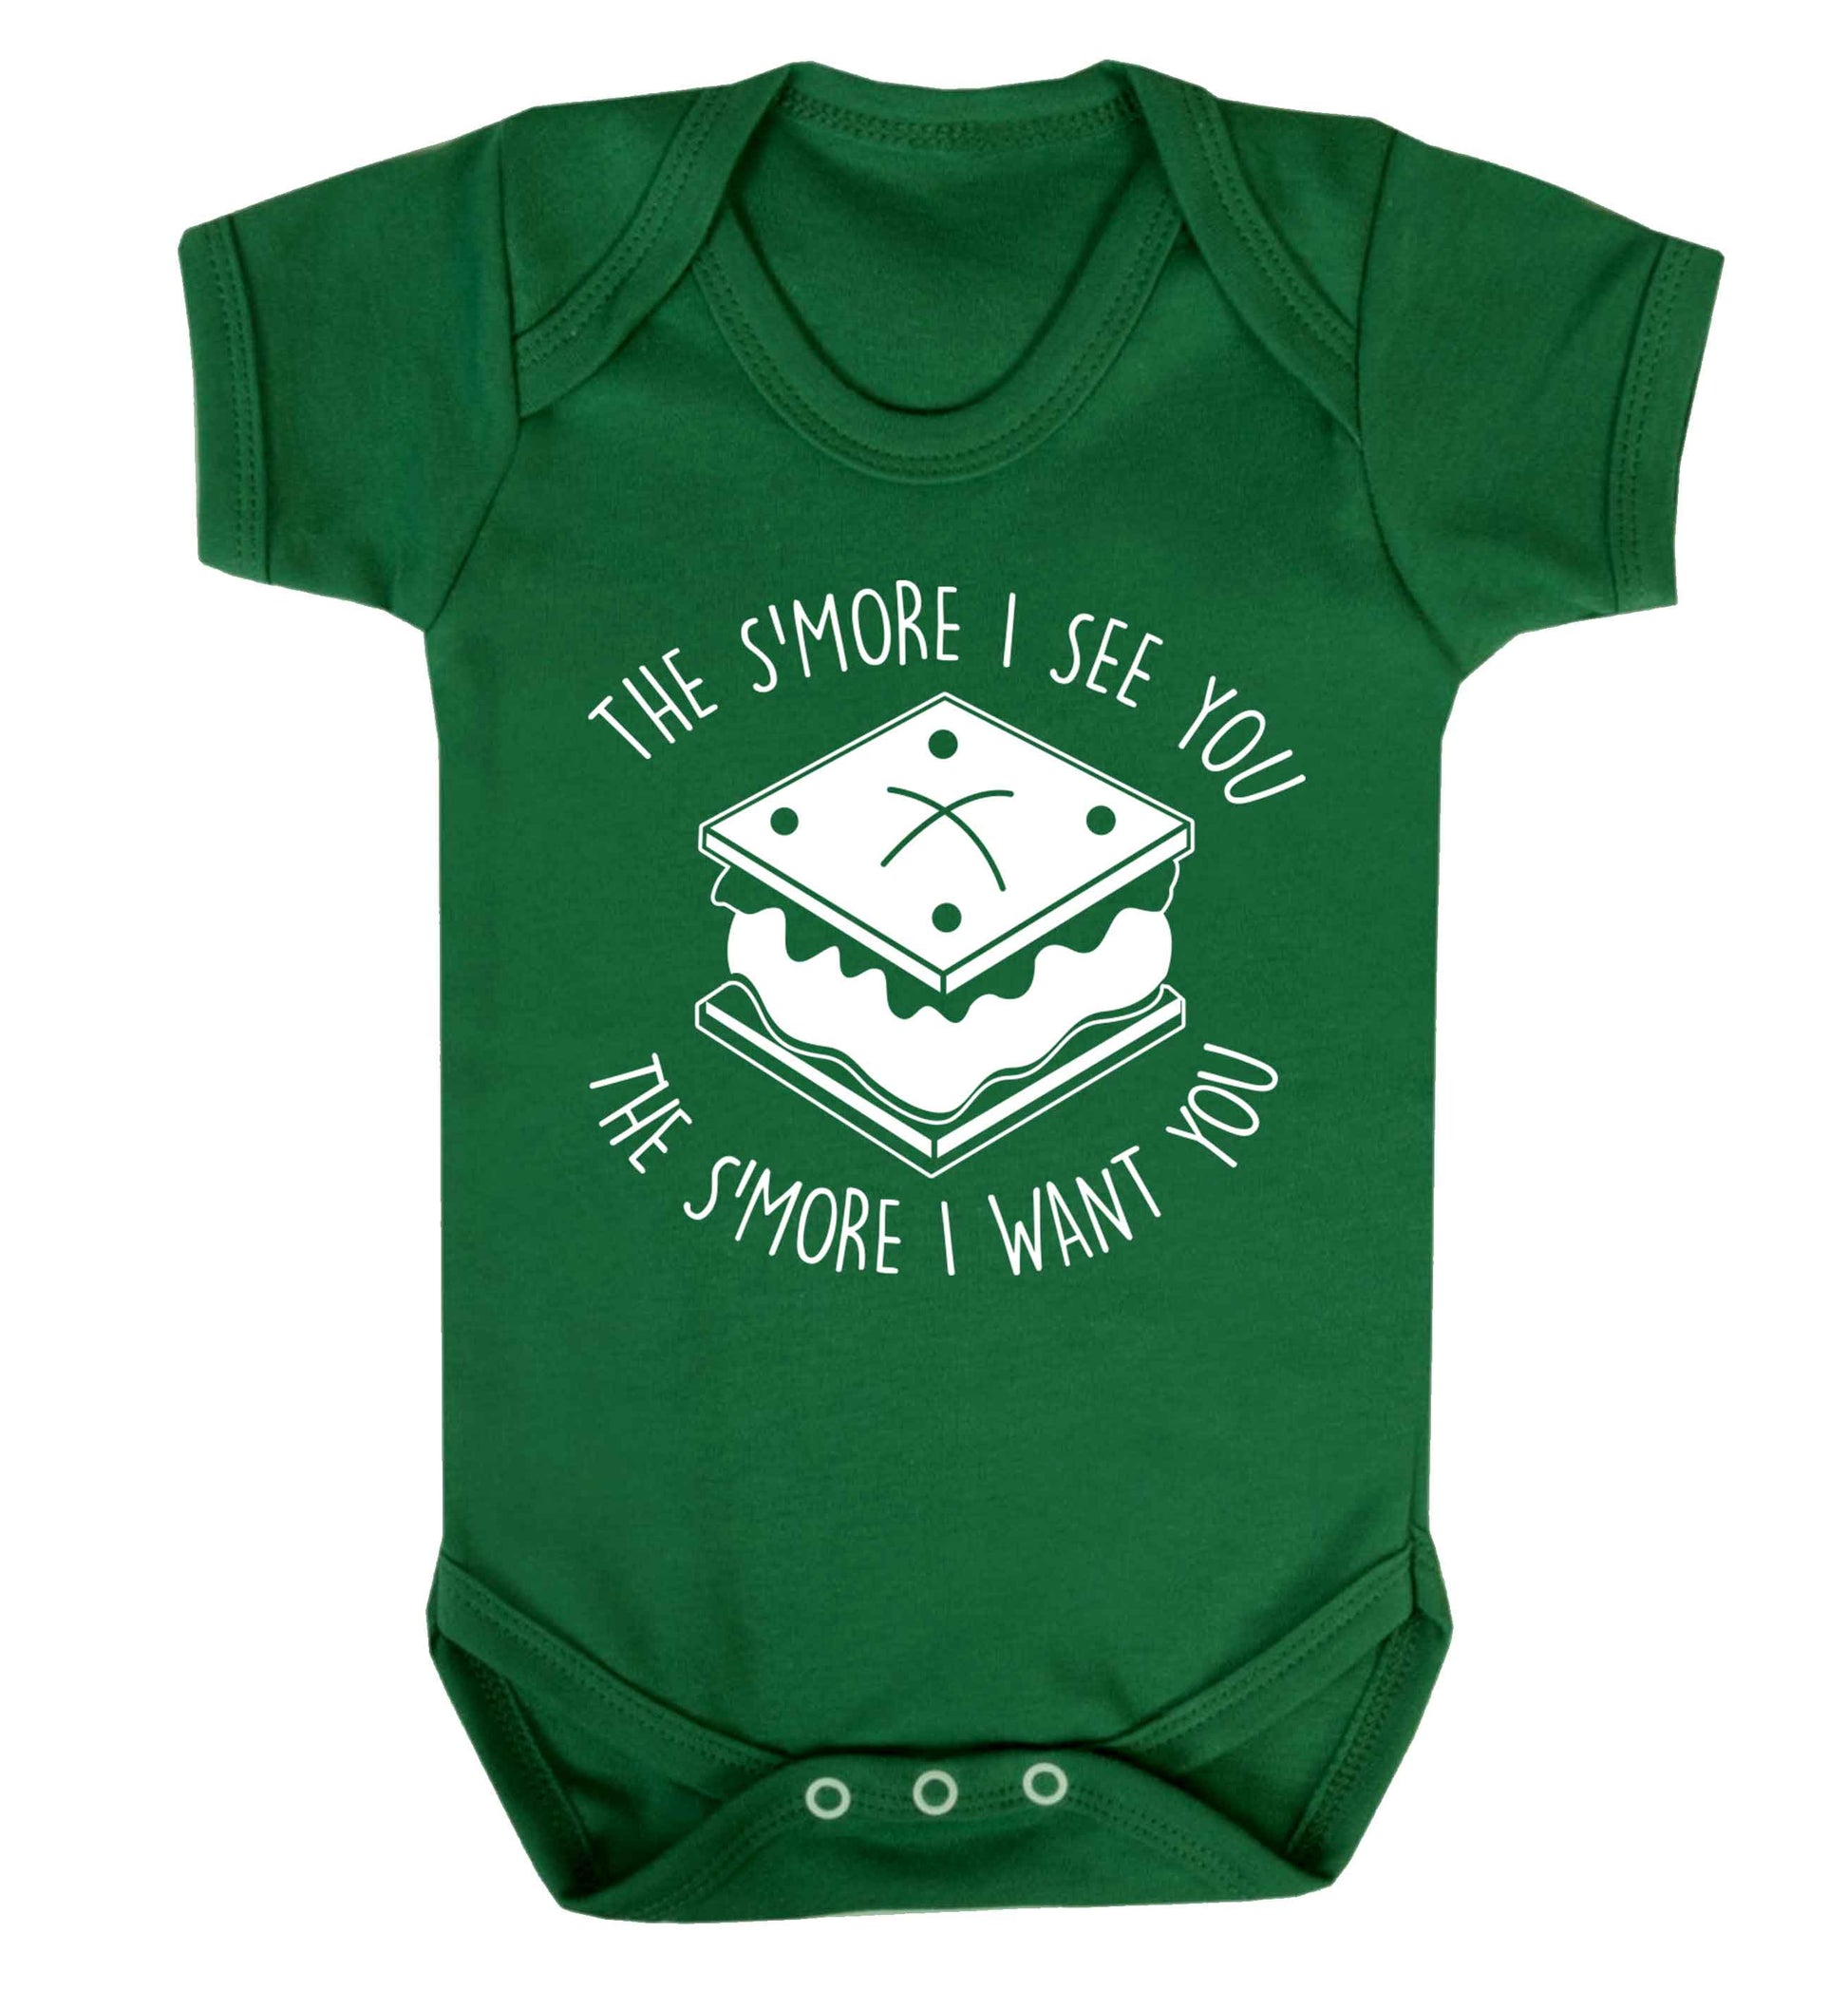 The s'more I see you the s'more I want you Baby Vest green 18-24 months